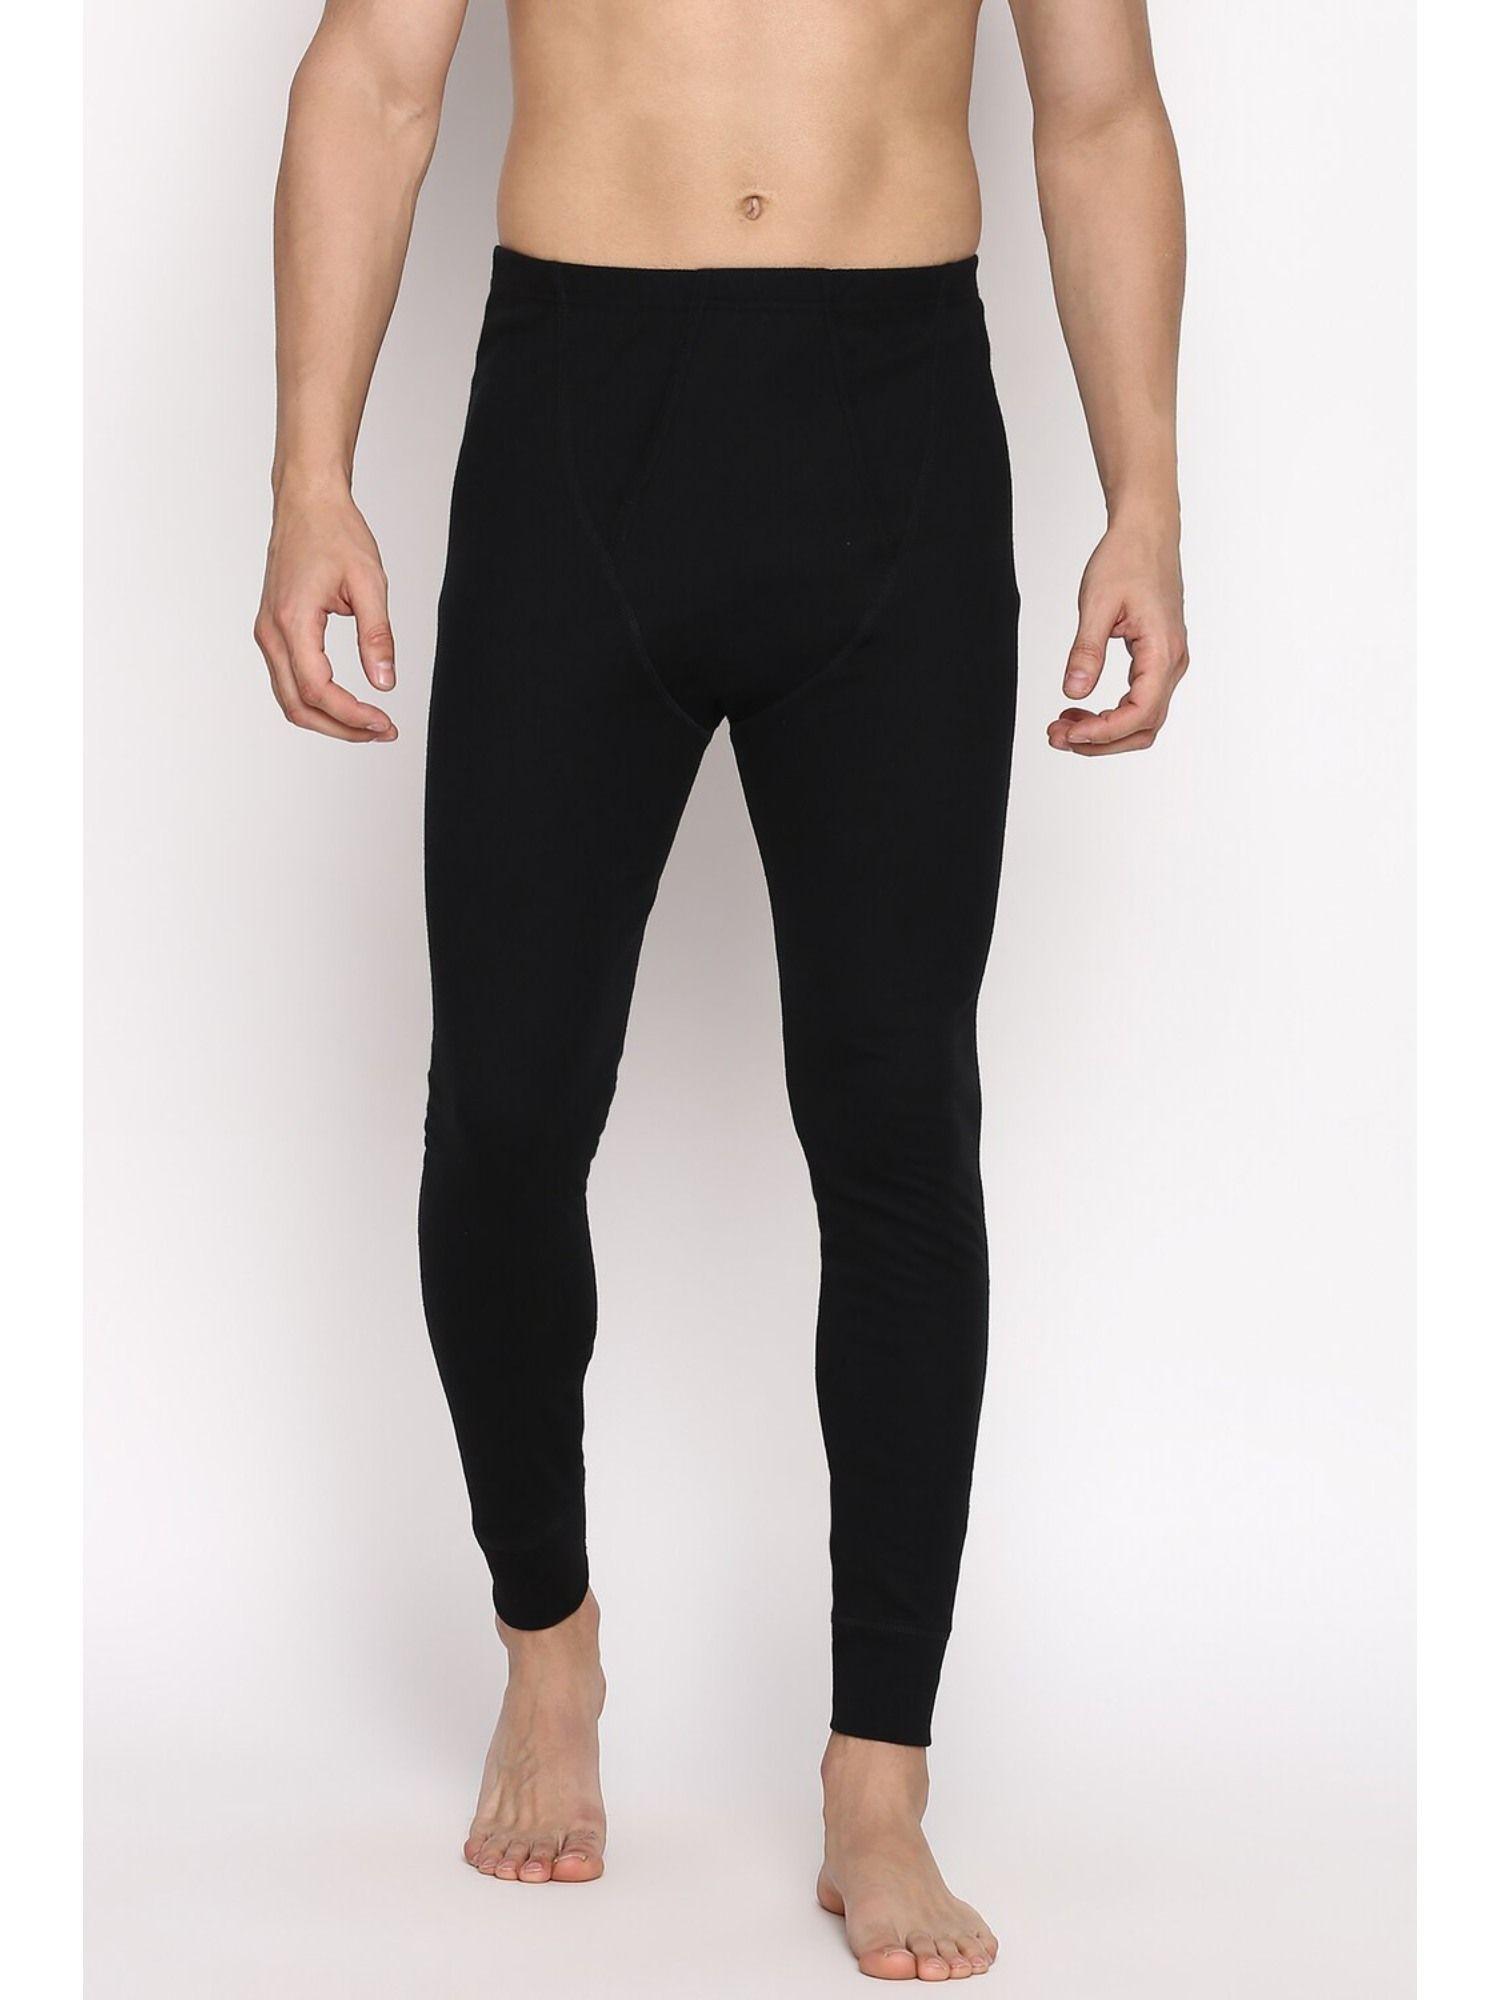 men warmtech thermal bottom anti bacterial and moisture wicking